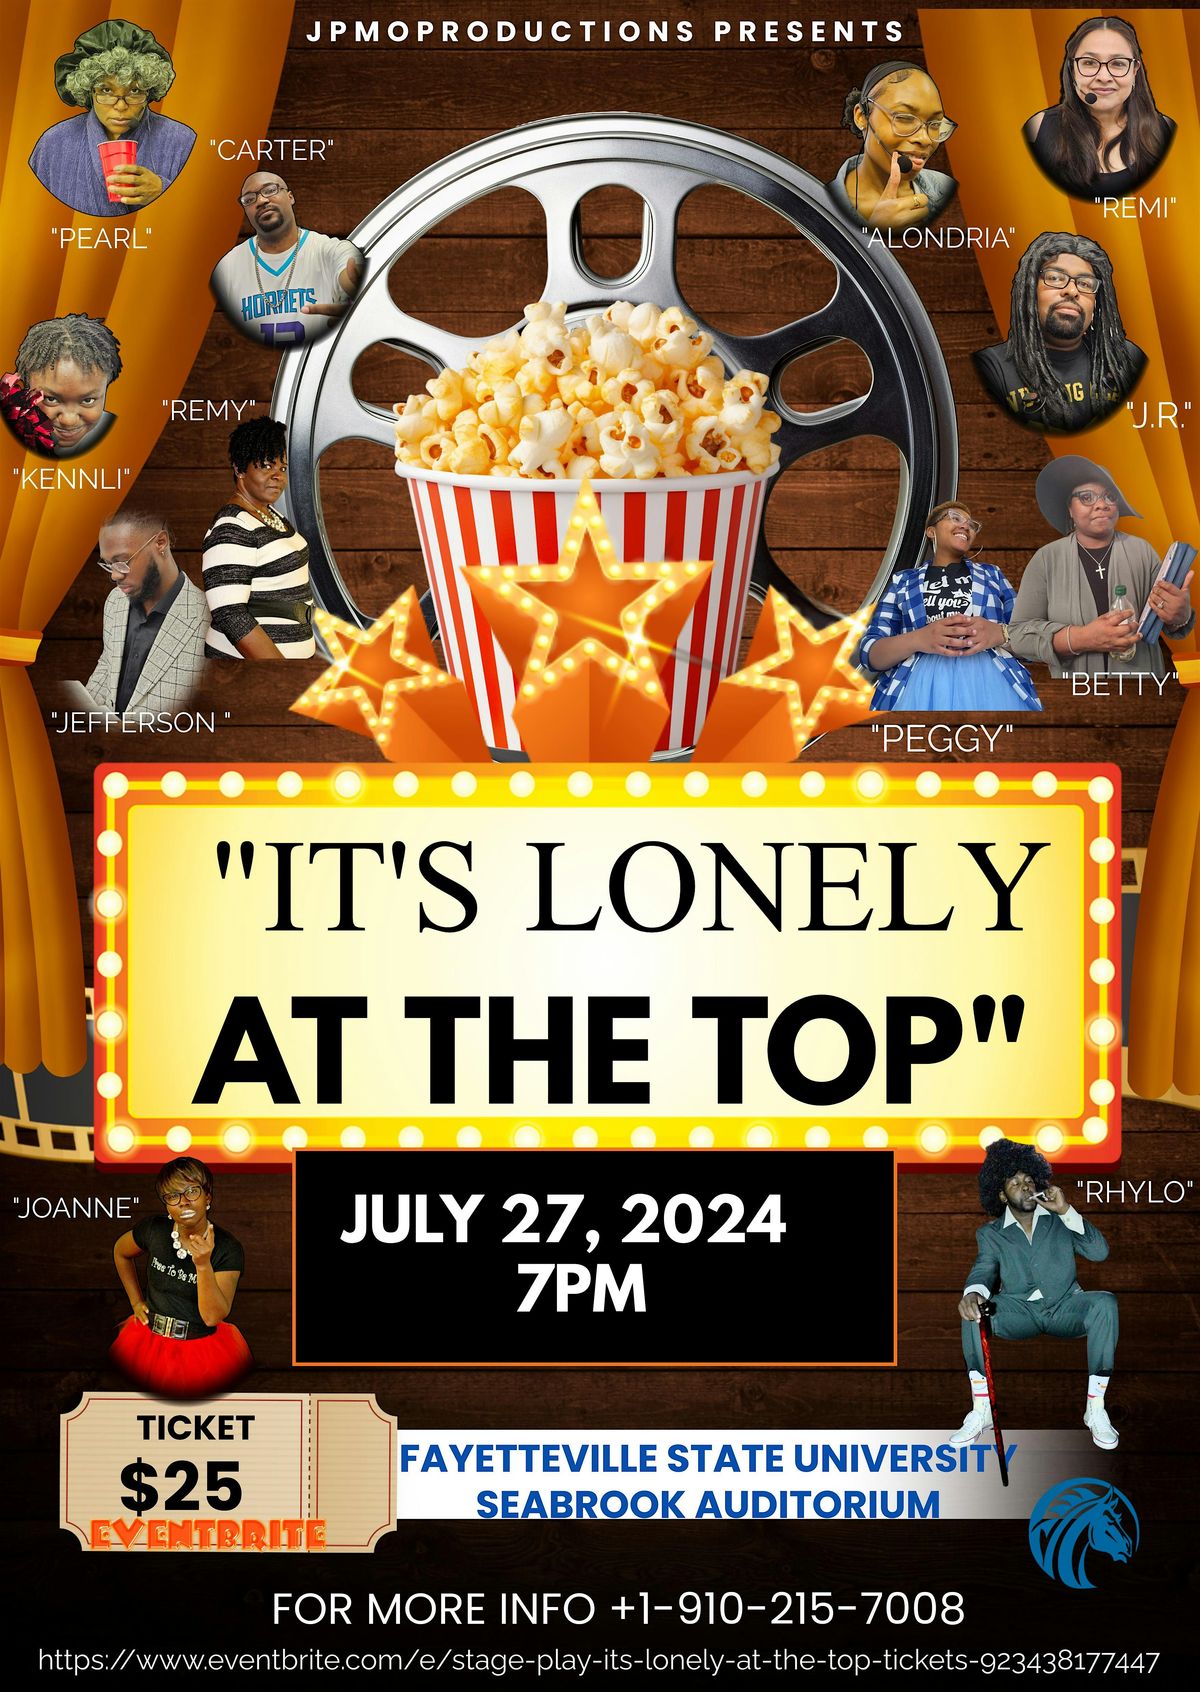 STAGE-PLAY "ITS LONELY AT THE TOP "